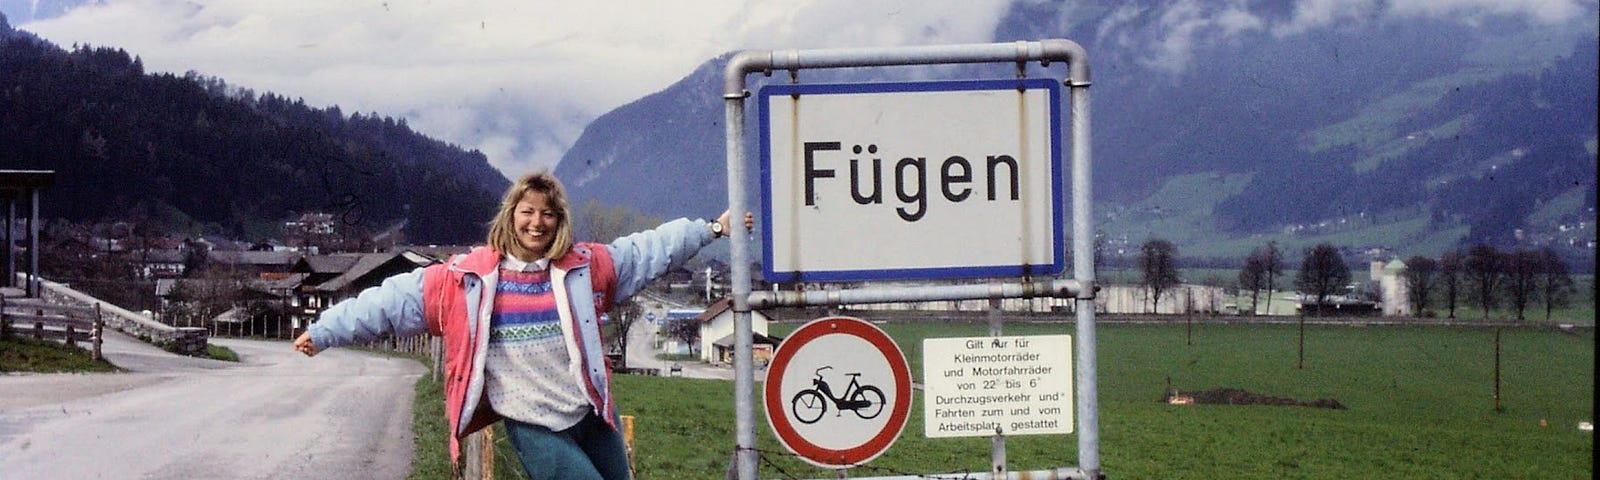 A woman standing on a wooden fence and holding onto a village sign, with a field and mountains in the background.